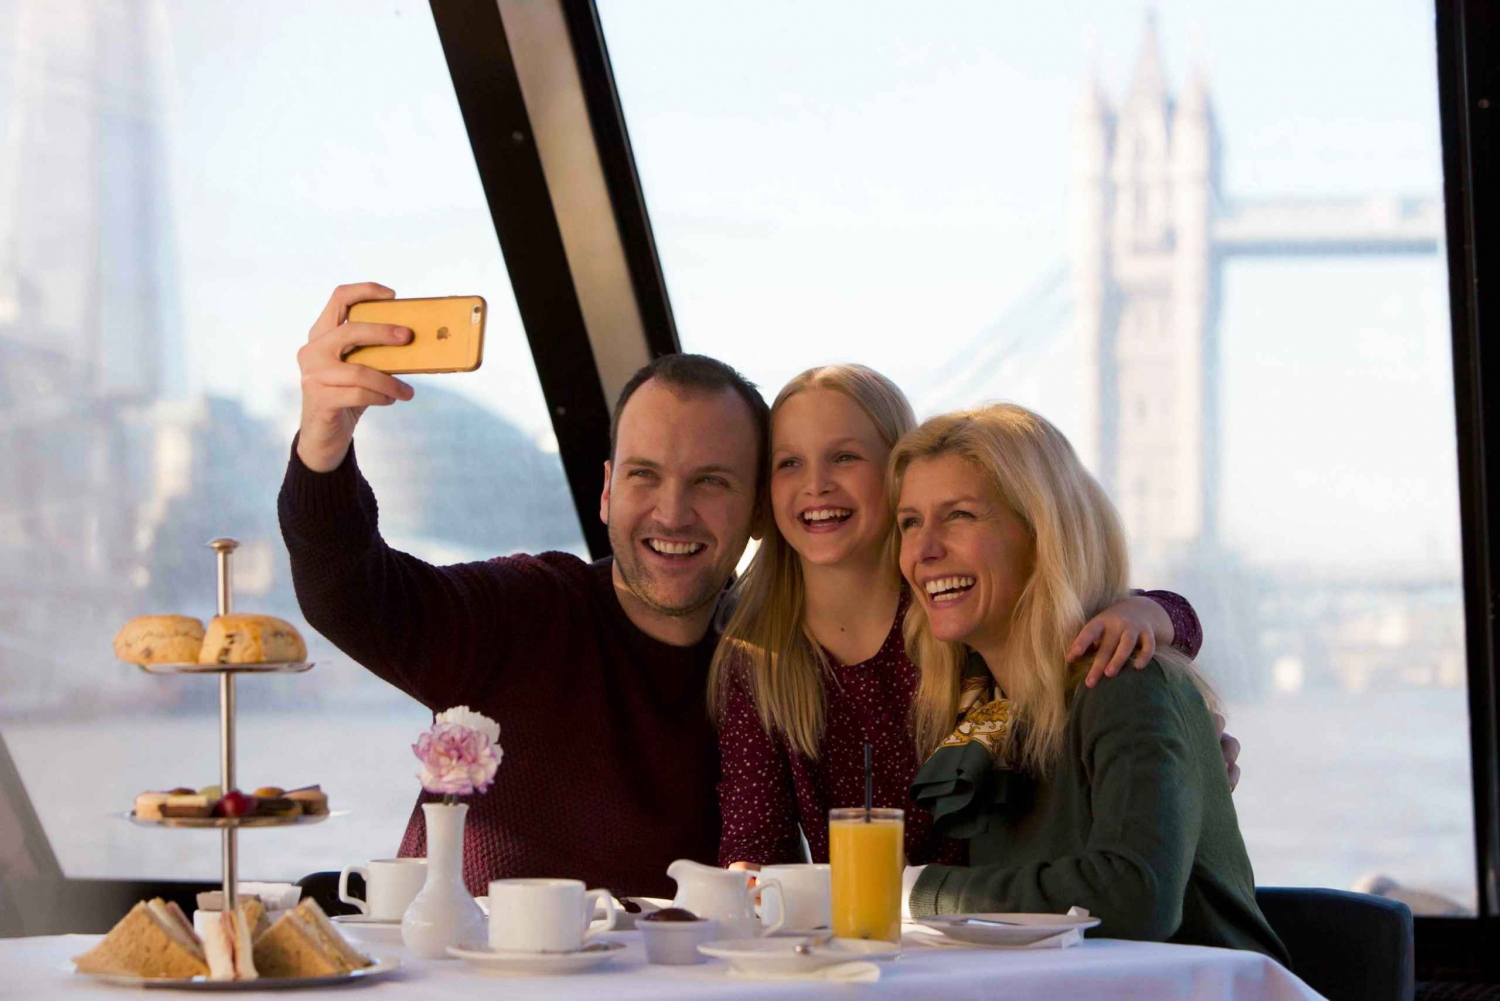 London: Afternoon Tea Cruise on the River Thames